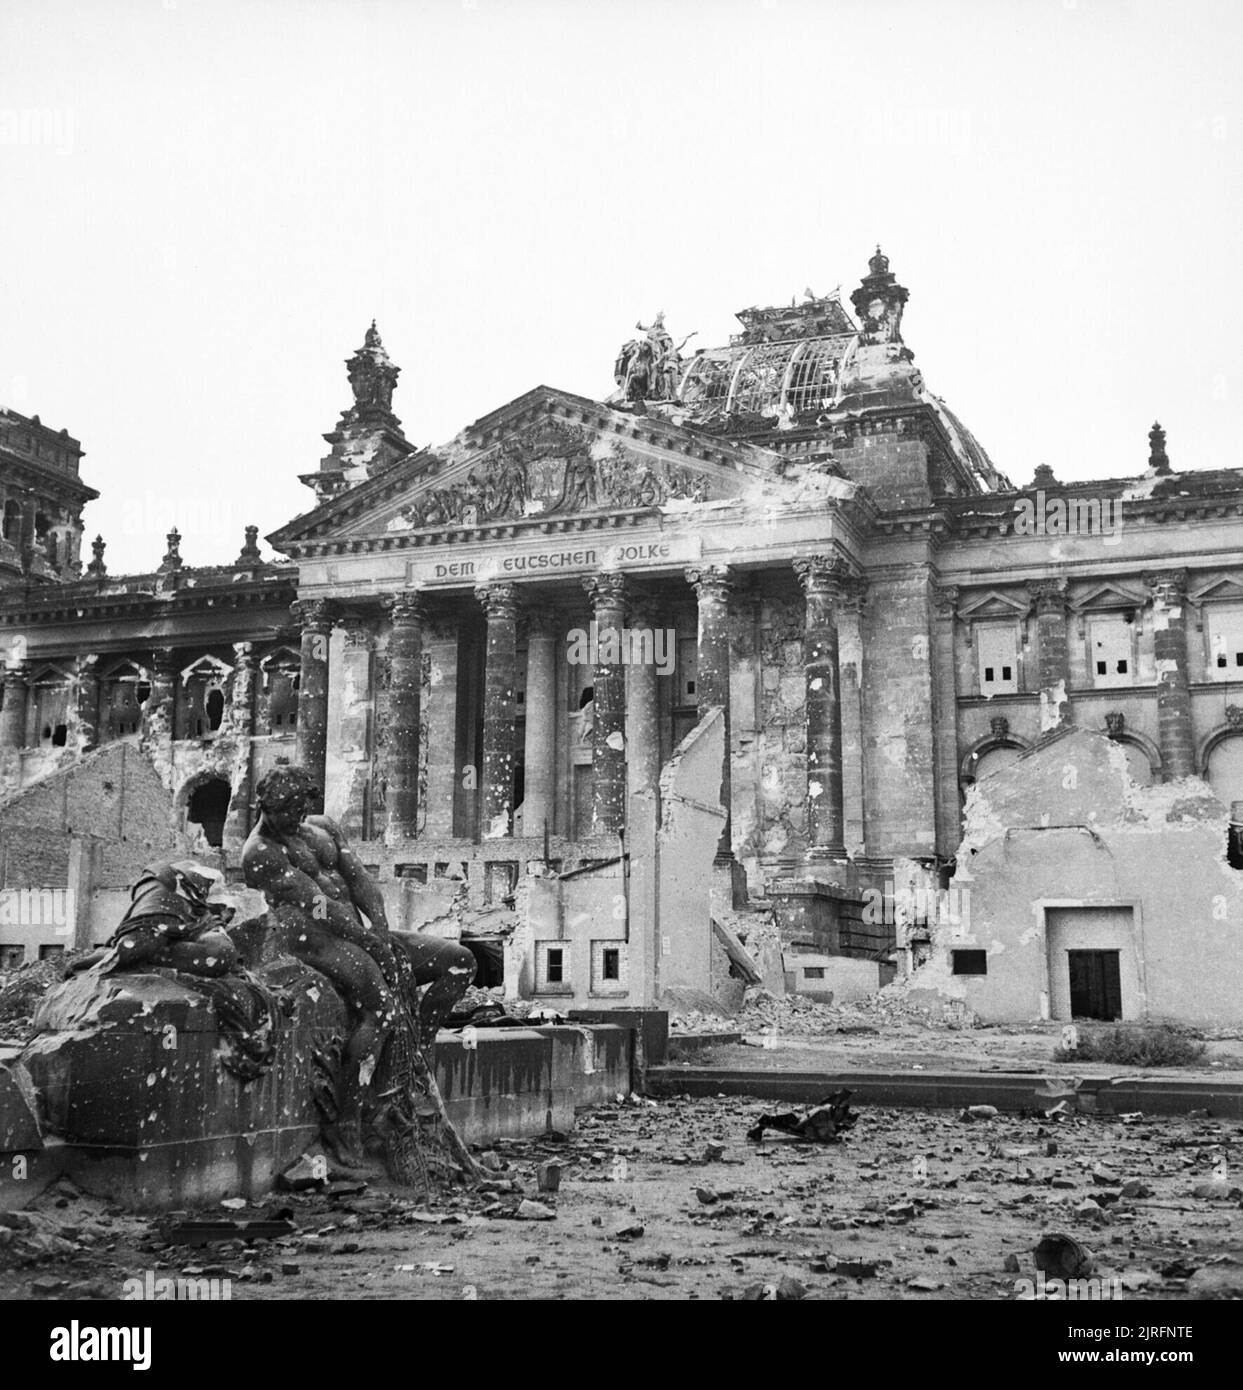 Ruins of the Reichstag in Berlin, 3 June 1945. The Reichstag after the allied bombing of Berlin. Stock Photo